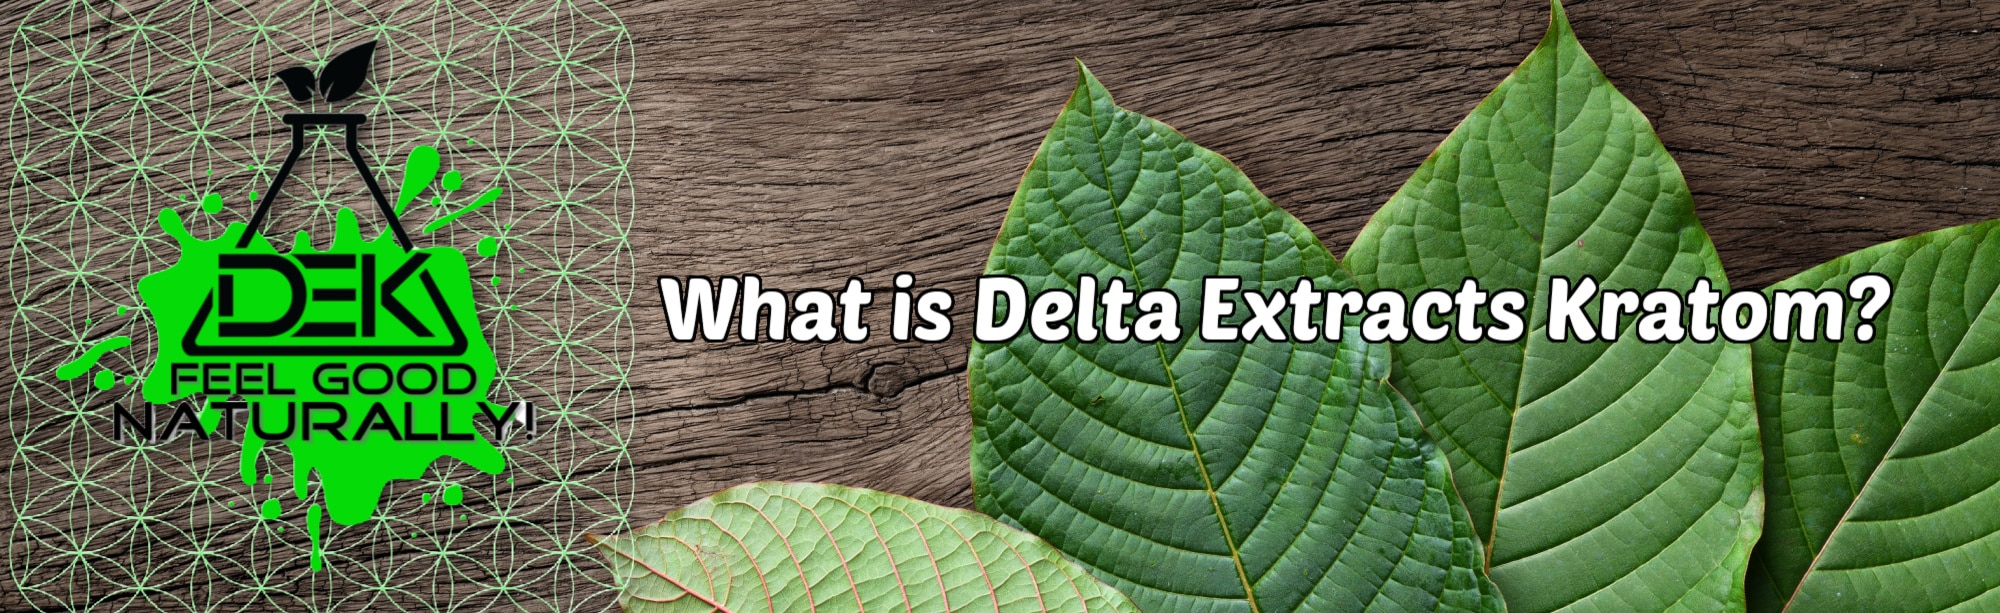 image of what is delta extracts kratom